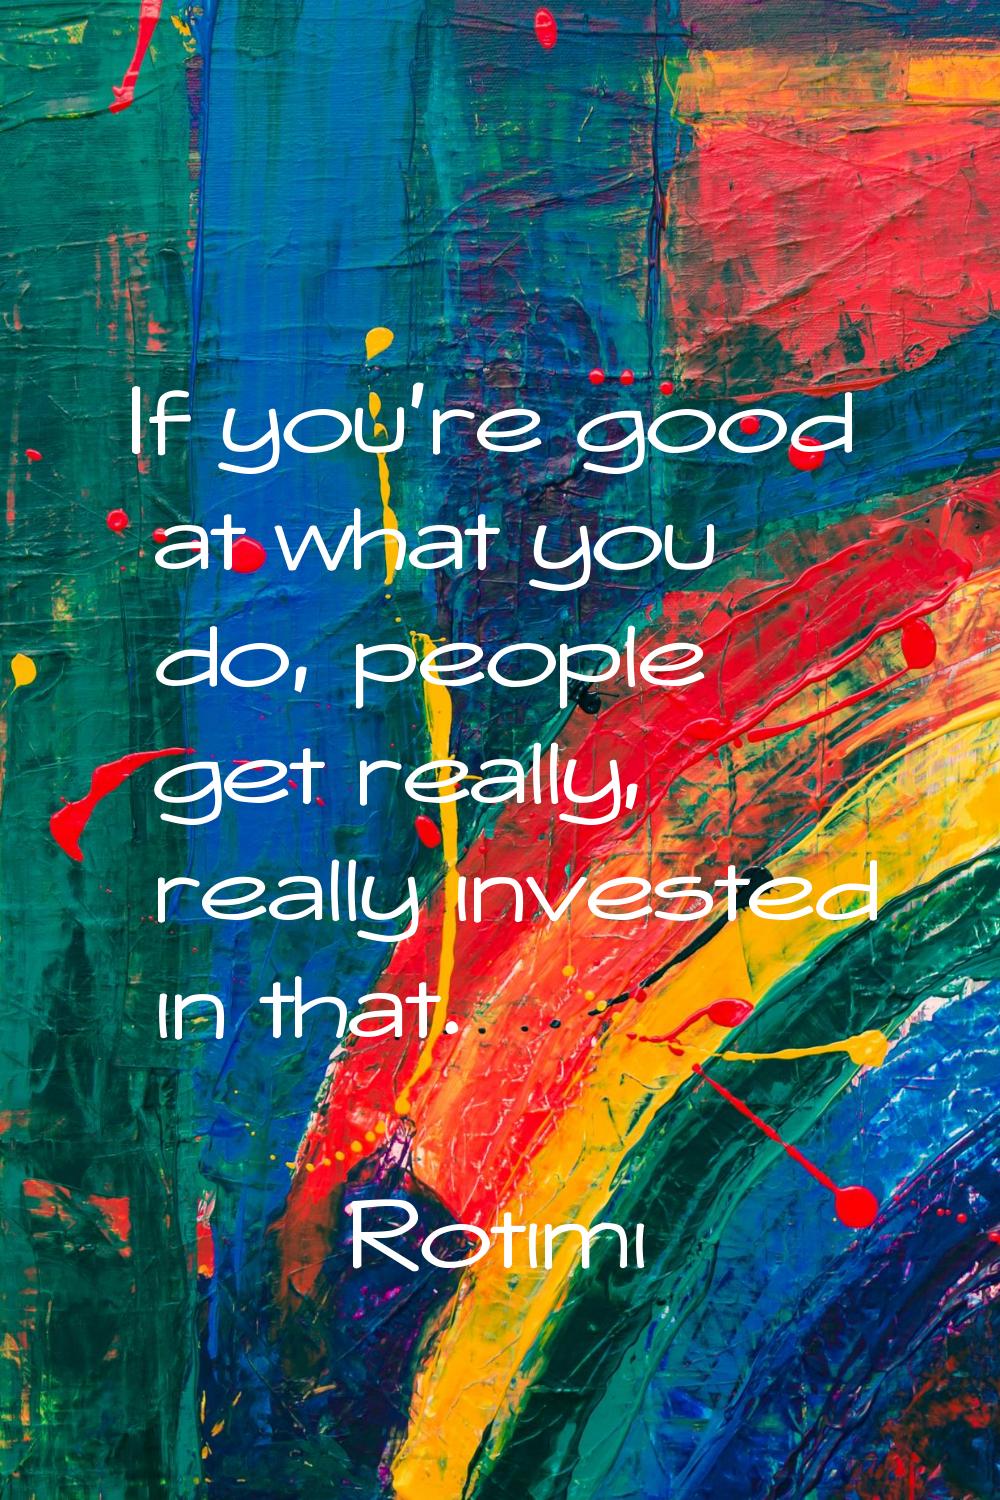 If you're good at what you do, people get really, really invested in that.